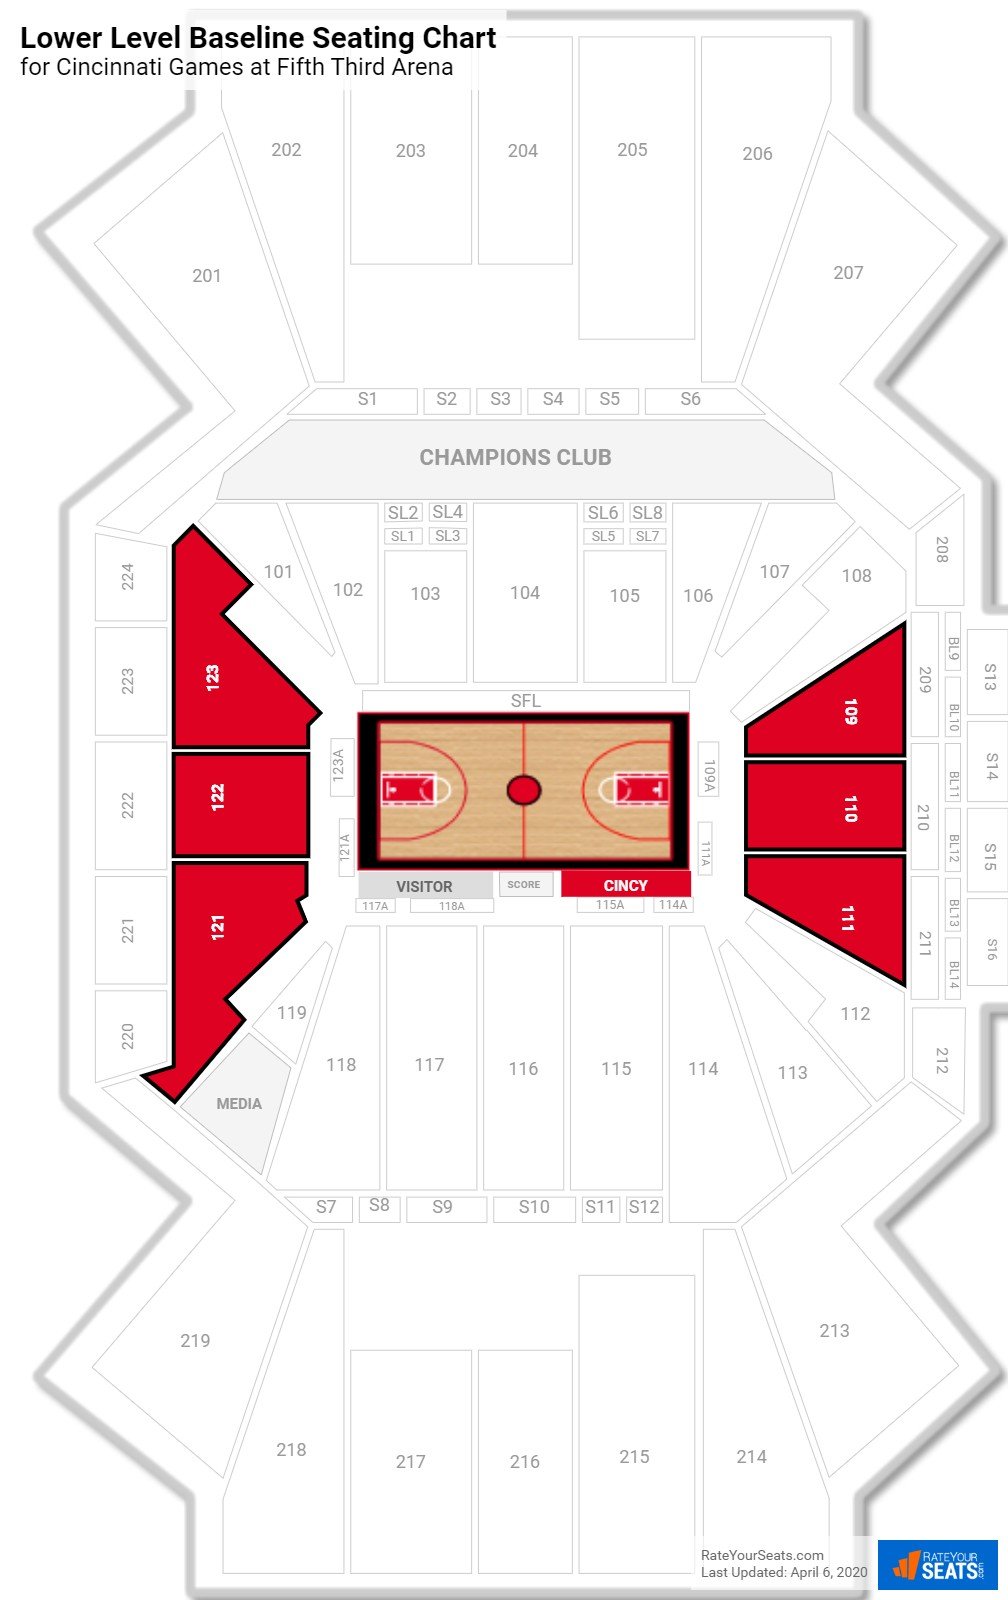 Fifth Third Arena Seating Chart: A Visual Reference of Charts | Chart ...